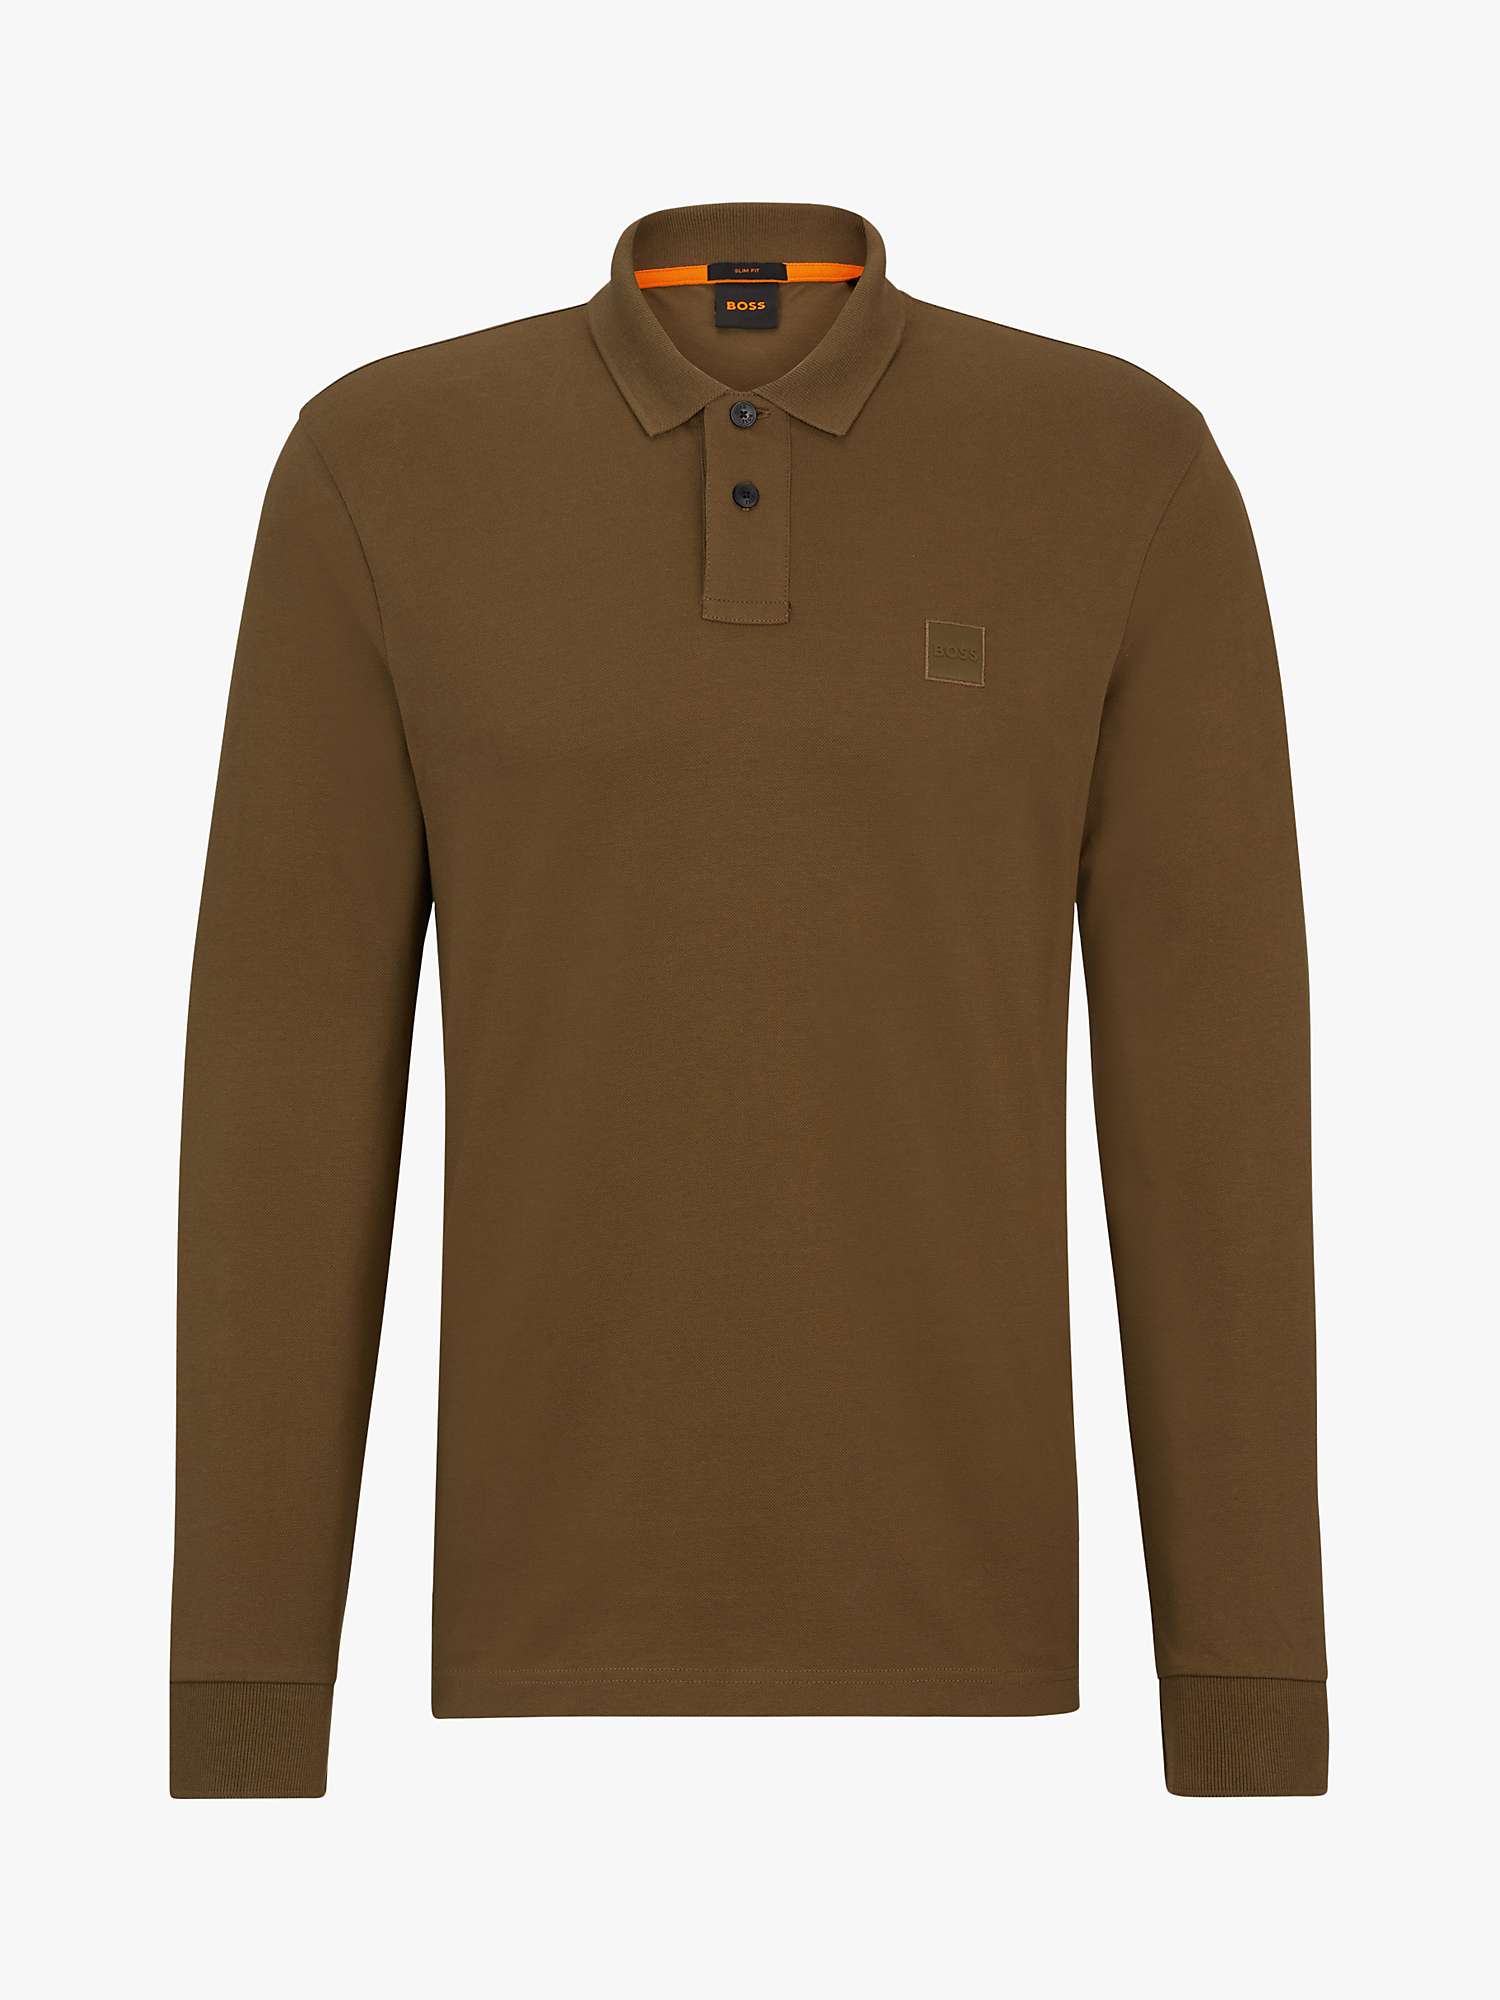 Buy BOSS Passerby 368 Long Sleeve Polo Shirt, Green Online at johnlewis.com